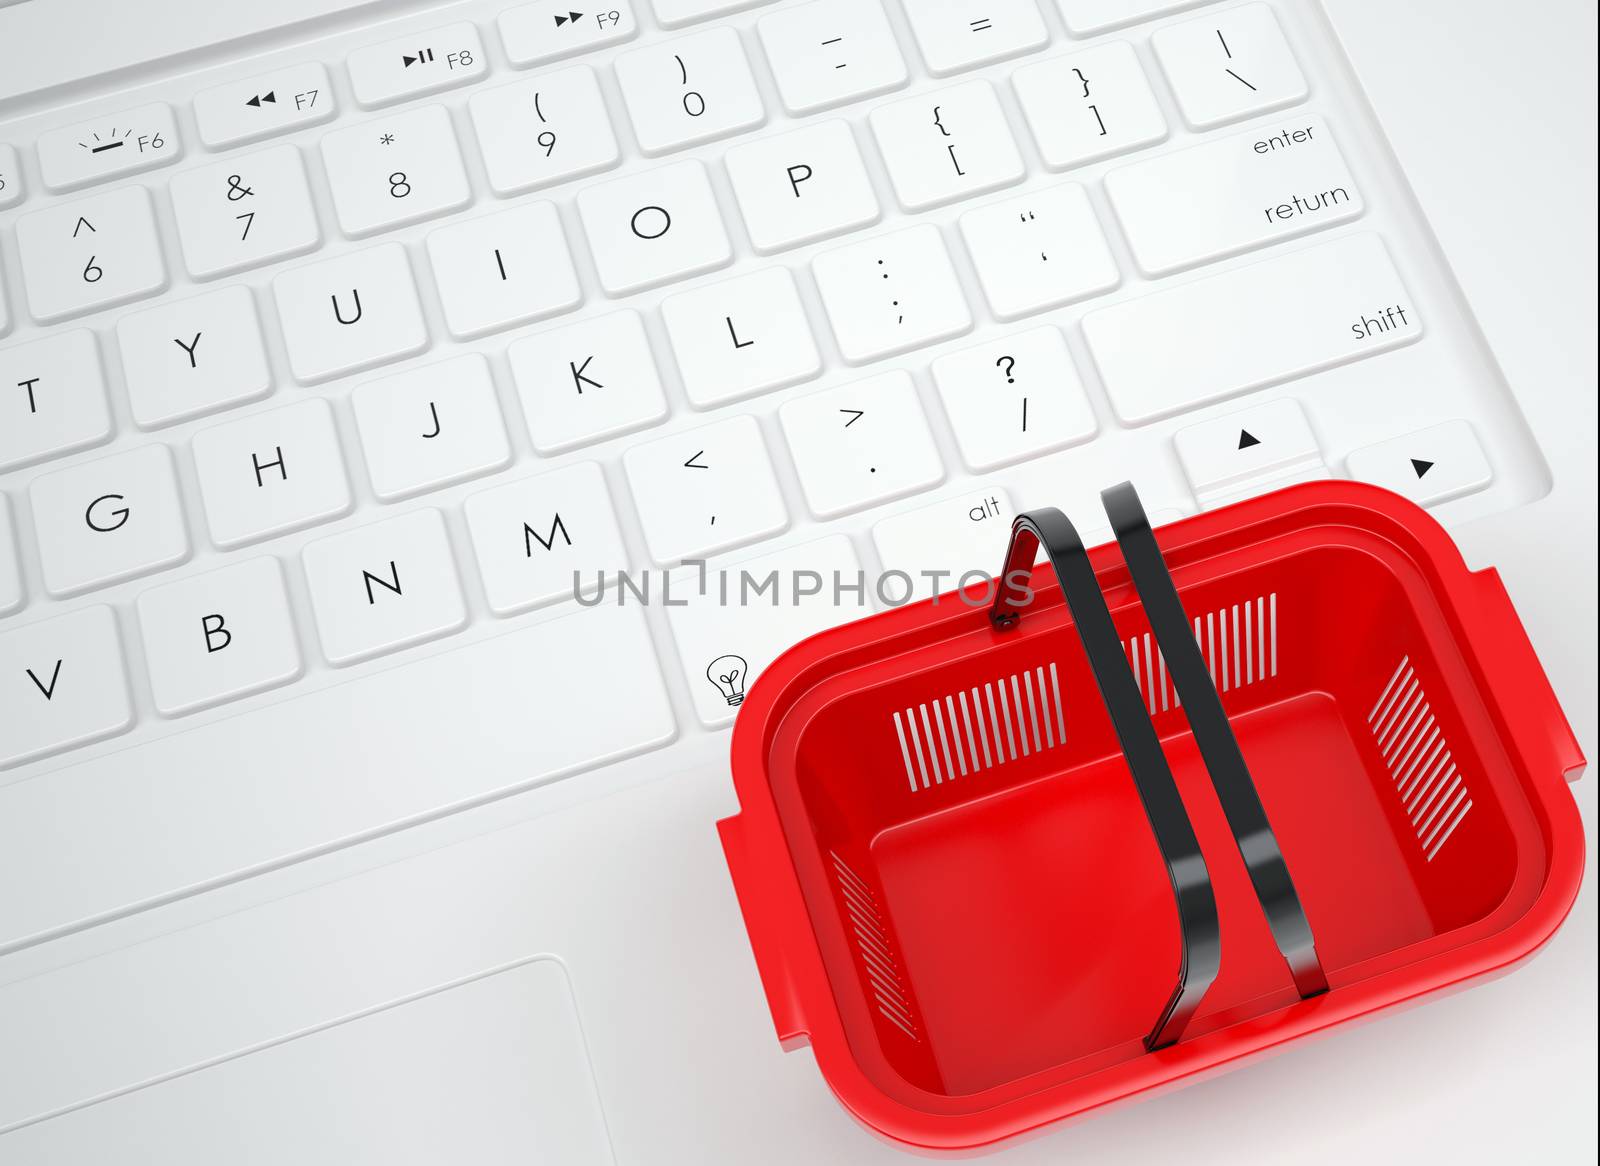 Shopping basket on the keyboard. View from above